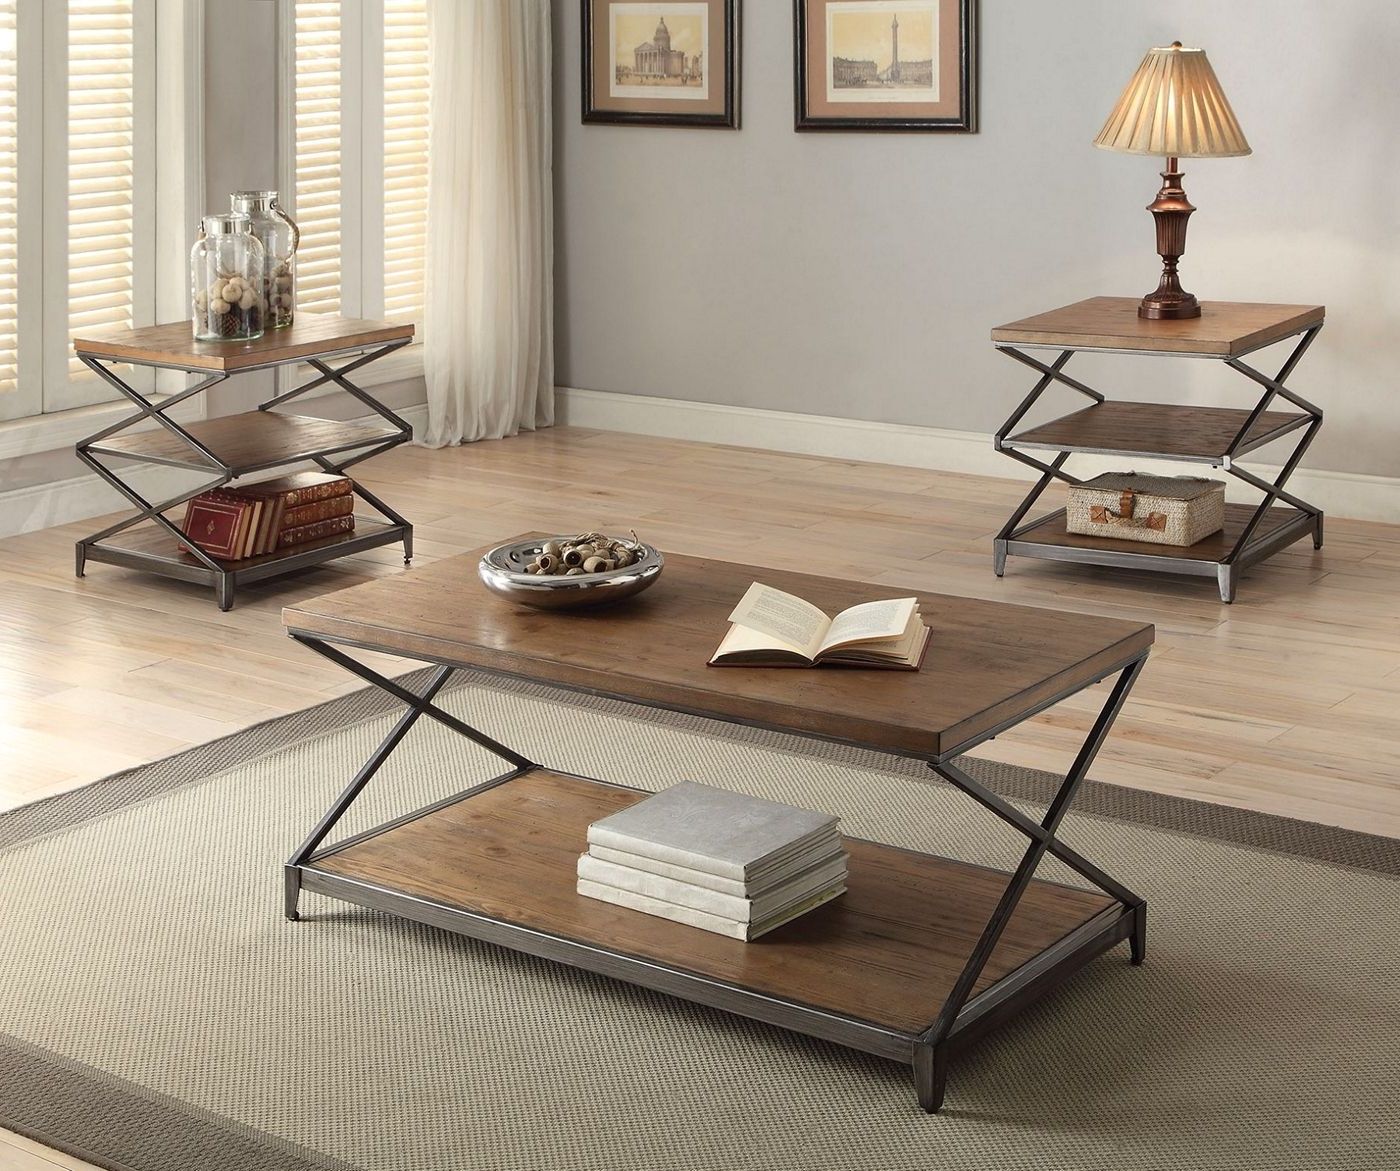 Alano Rustic Slat Wood Coffee Table In Oak & Antique Black With Famous Gray Wood Black Steel Coffee Tables (View 4 of 15)